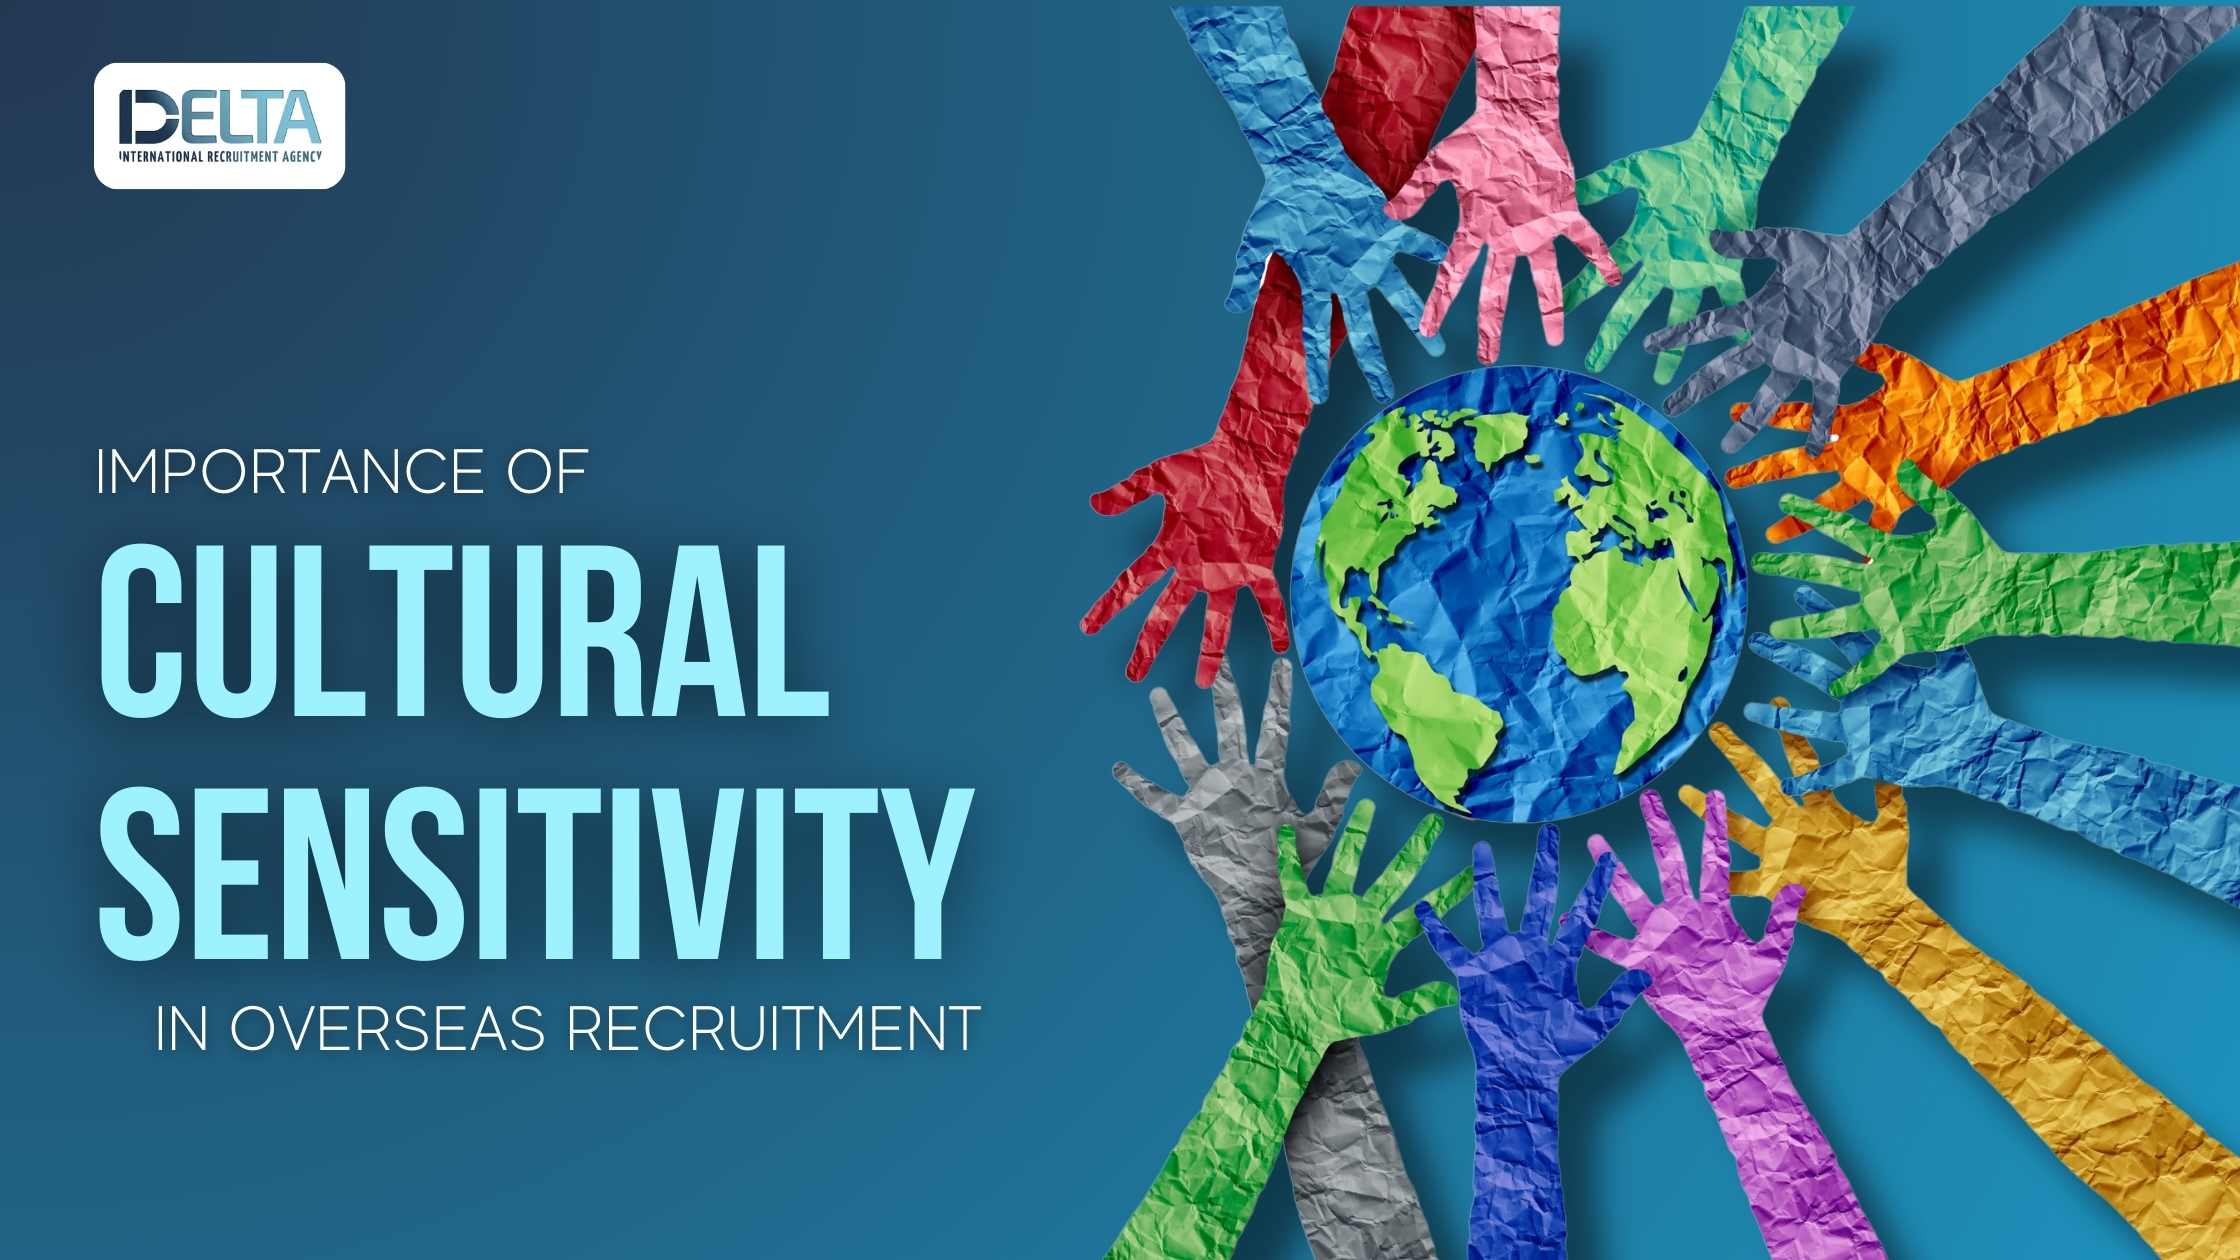 What is the Importance of Cultural Sensitivity in Overseas Recruitment?